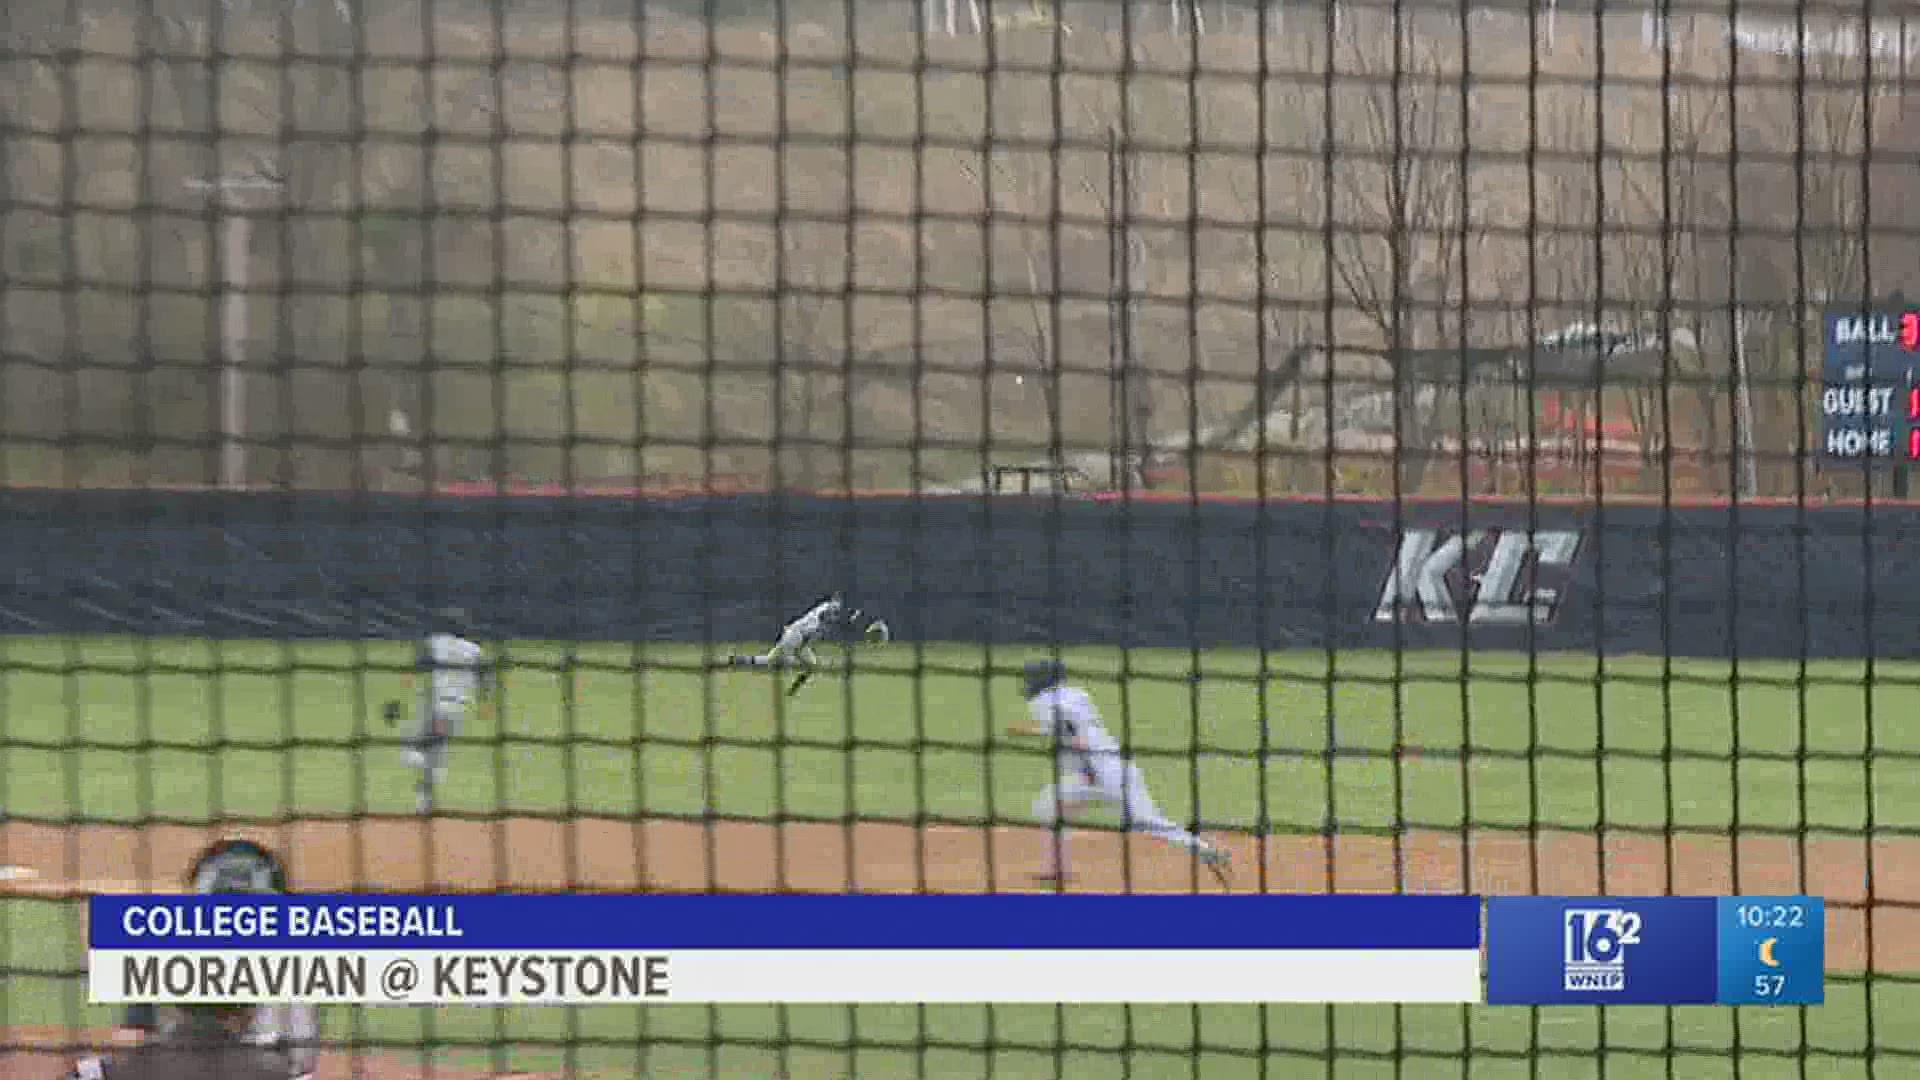 A four run 5th inning propelled Keystone to an 11-5 win over Moravian in college baseball.